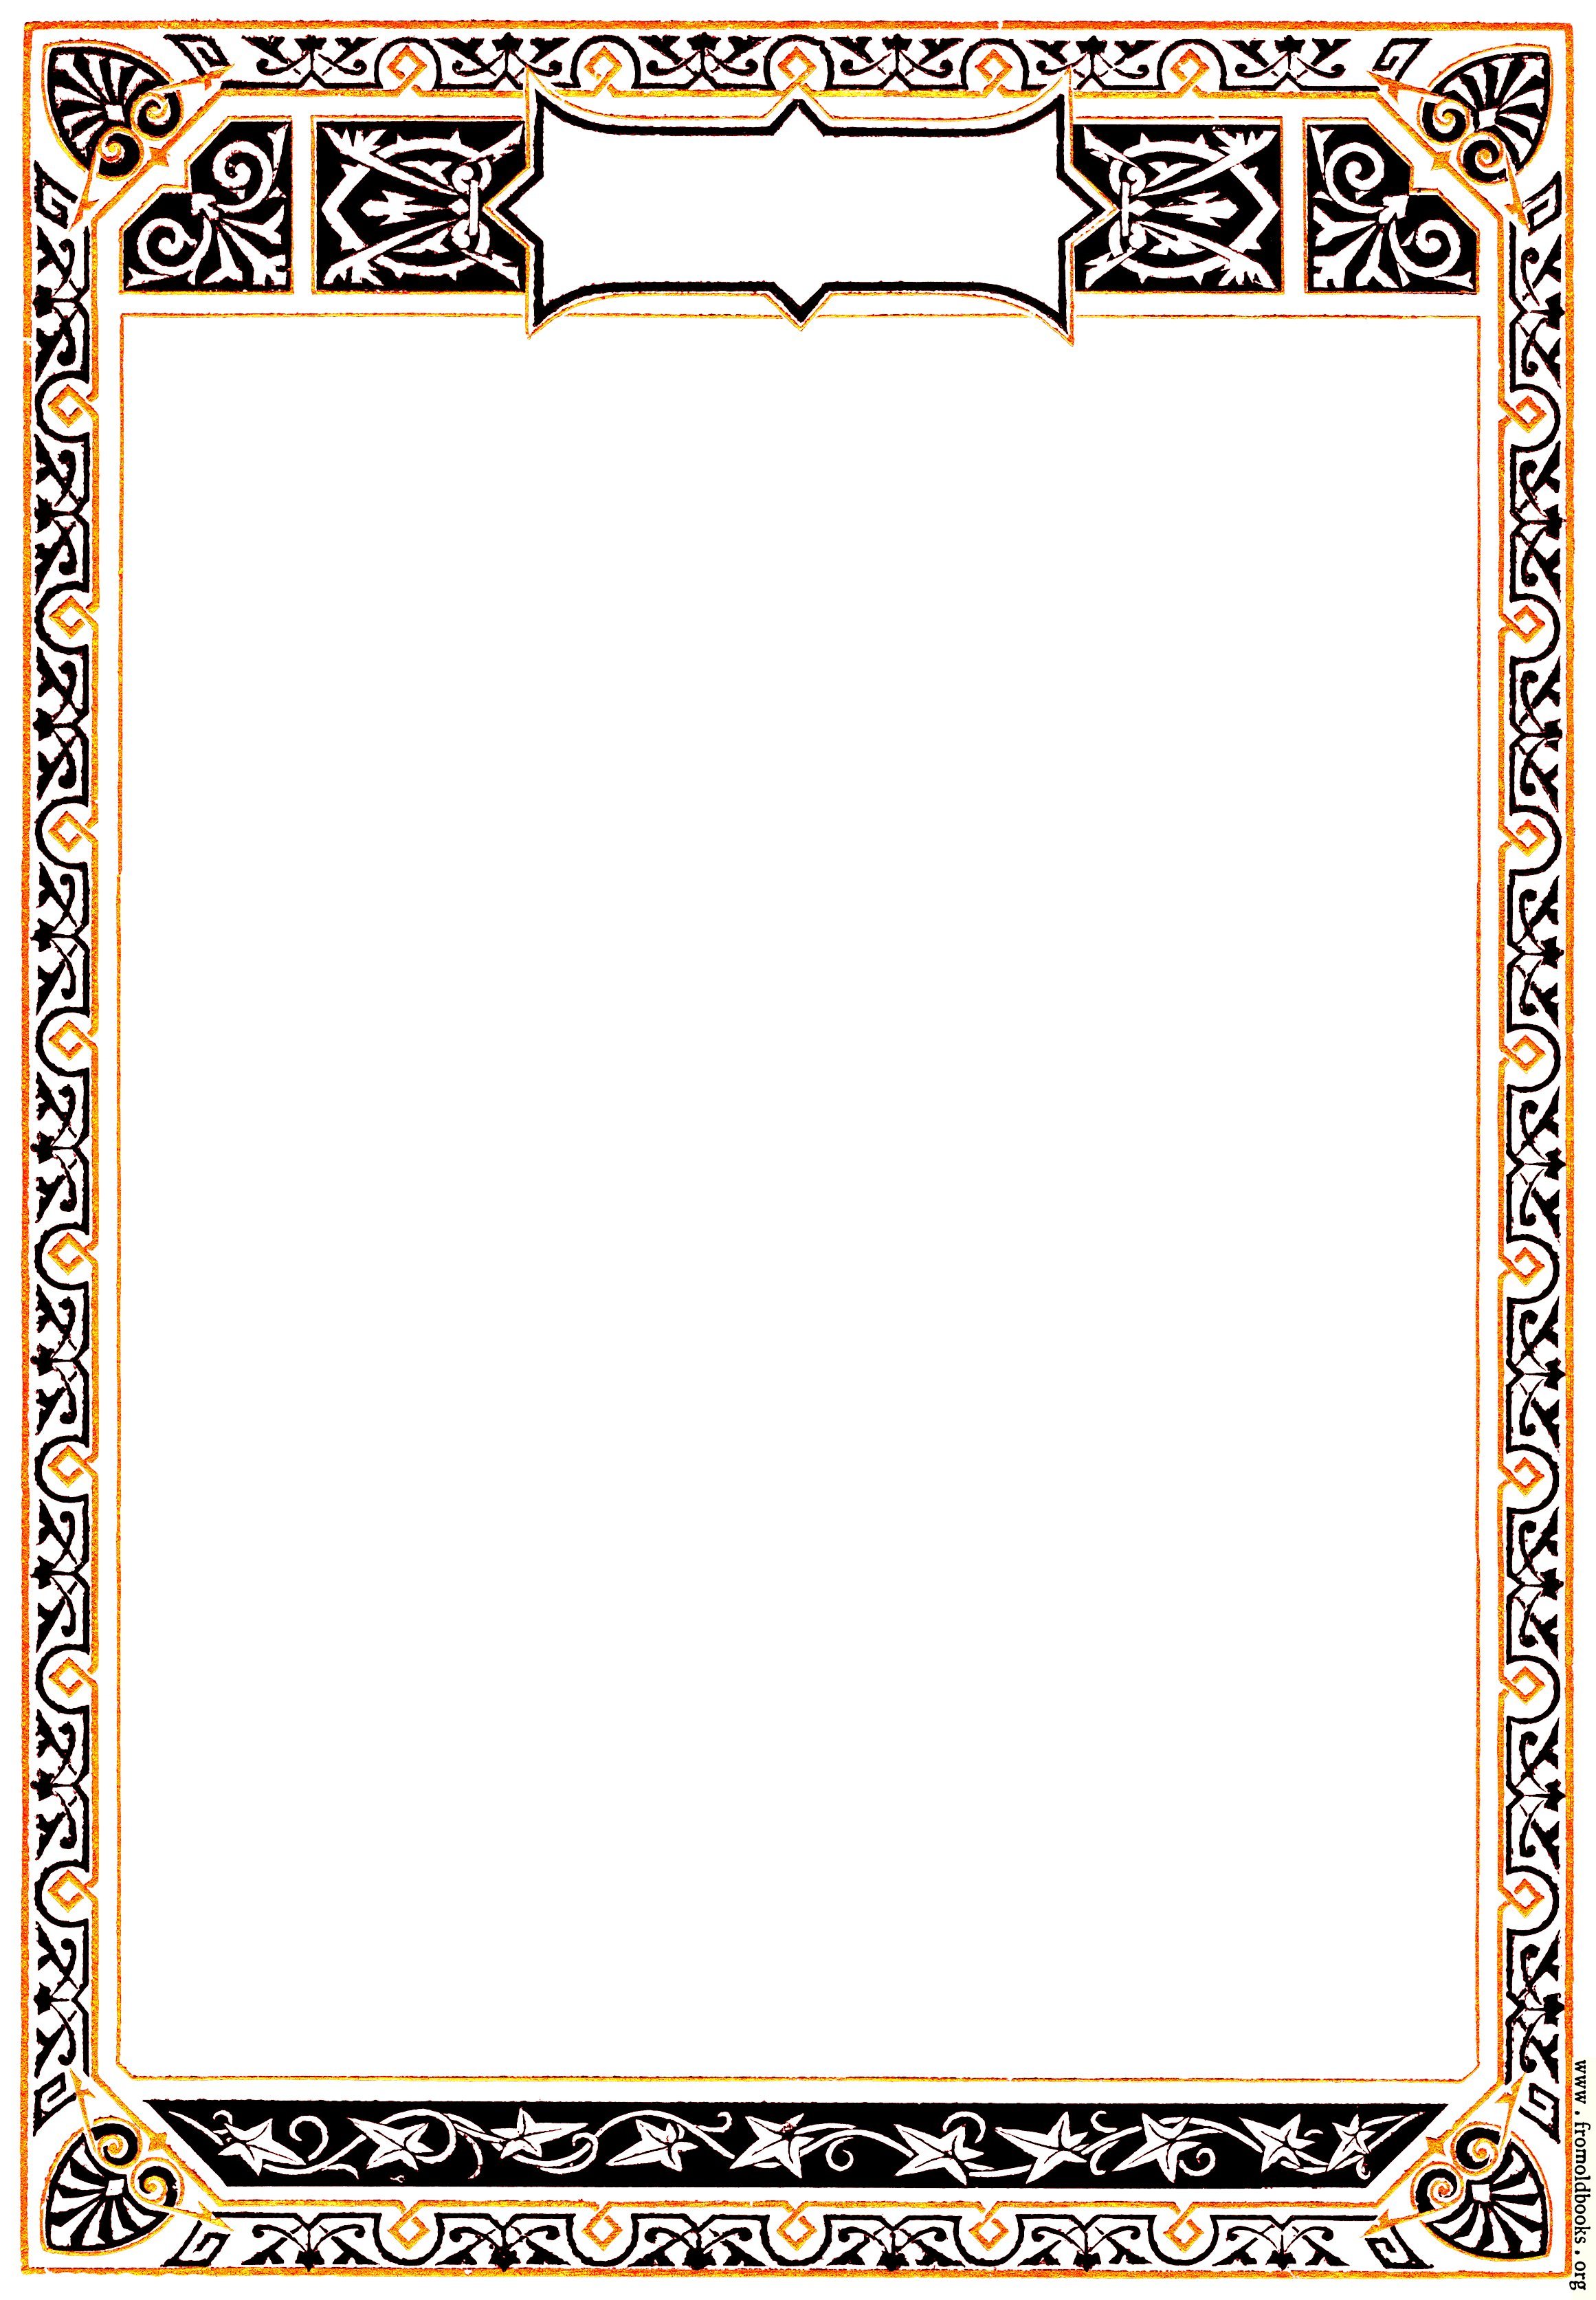 Ornate Early Victorian full-page Geometric Border